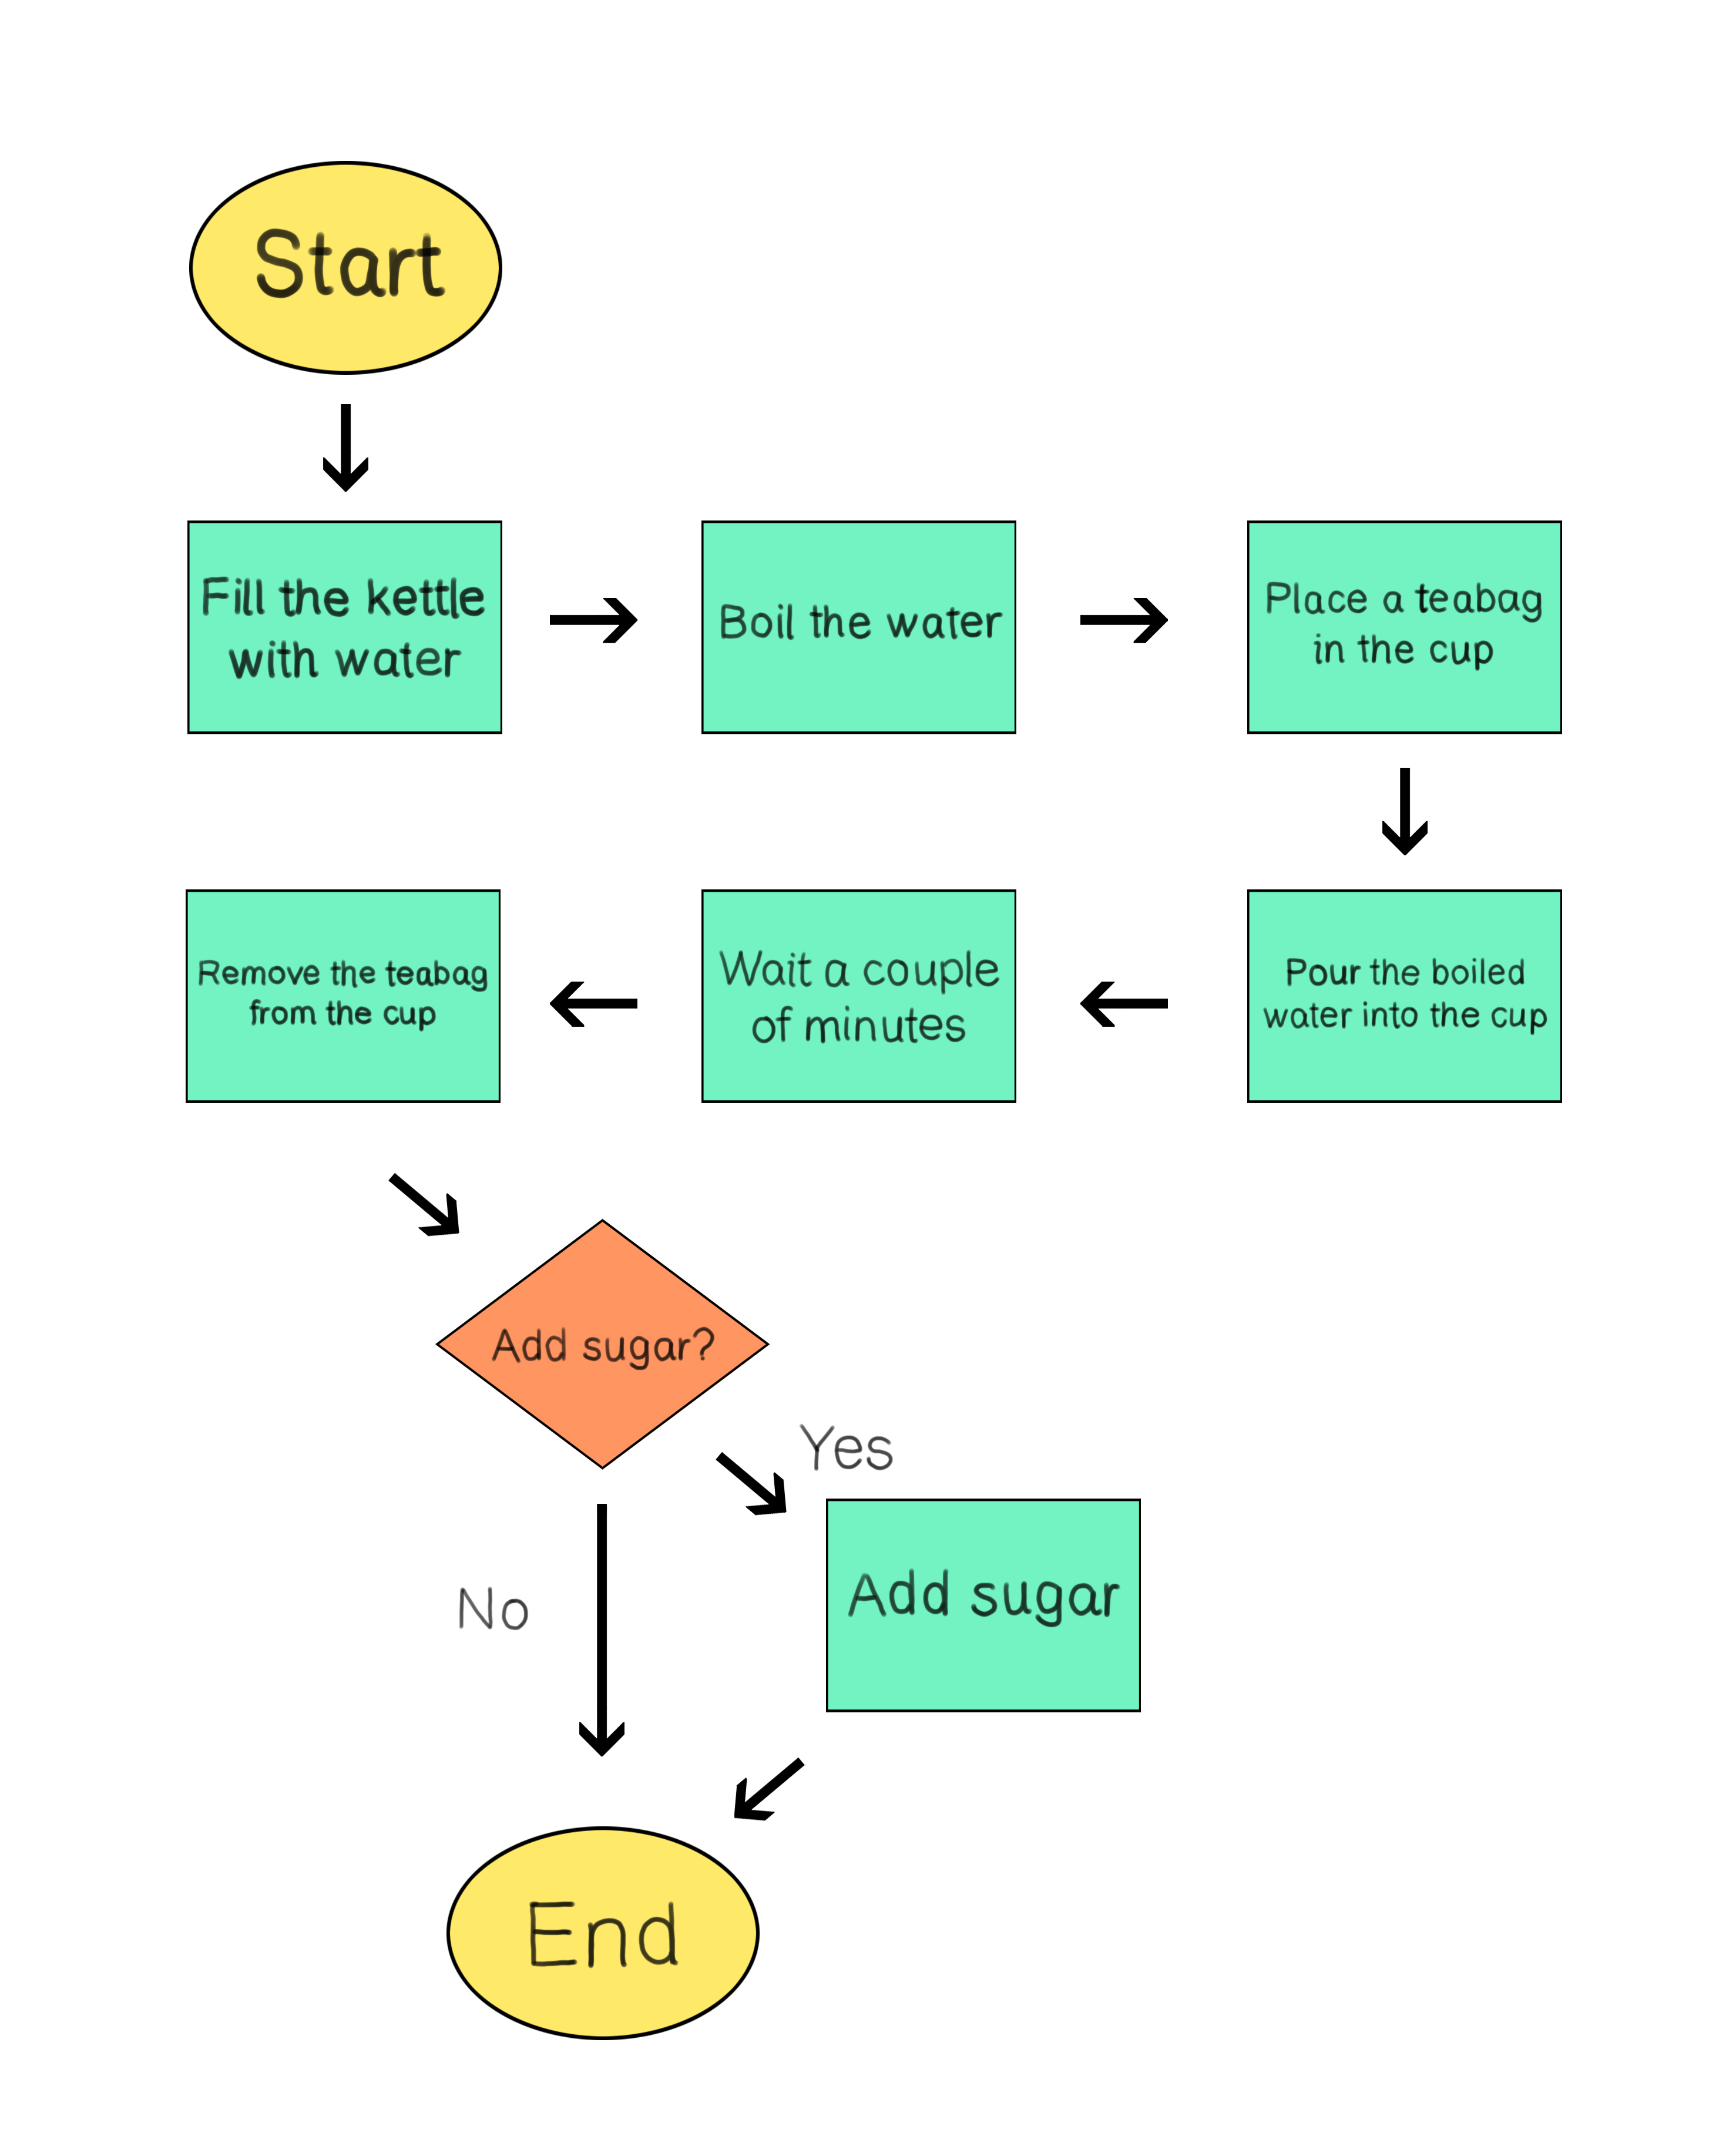 Completed flowchart